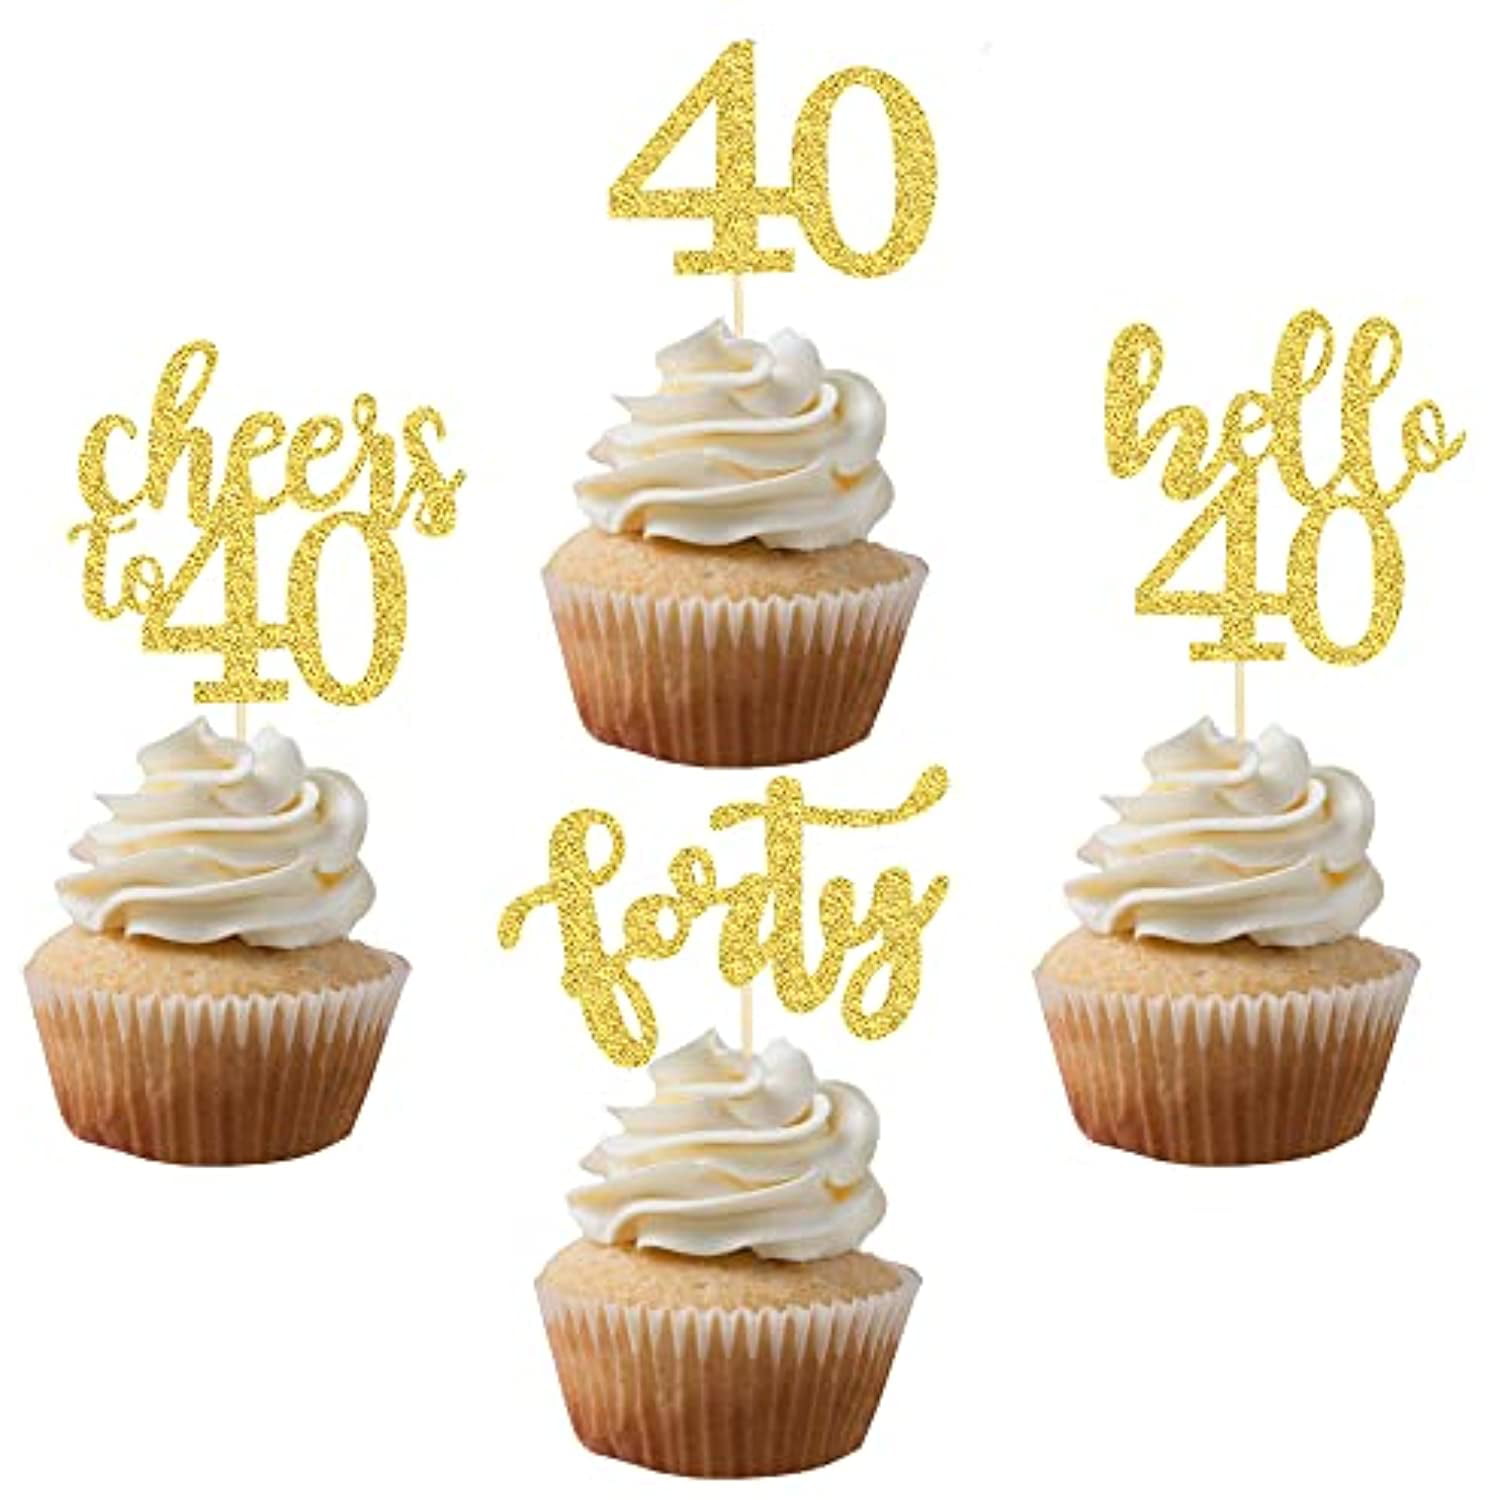 Gold 40 Pieces Happy Birthday Cupcake Topper Birthday Party Cupcake Picks Glitter Cake Topper Celebrating Birthday Cake Picks Birthday Cupcake Decor for Baby Shower Kid Birthday Party Decor 